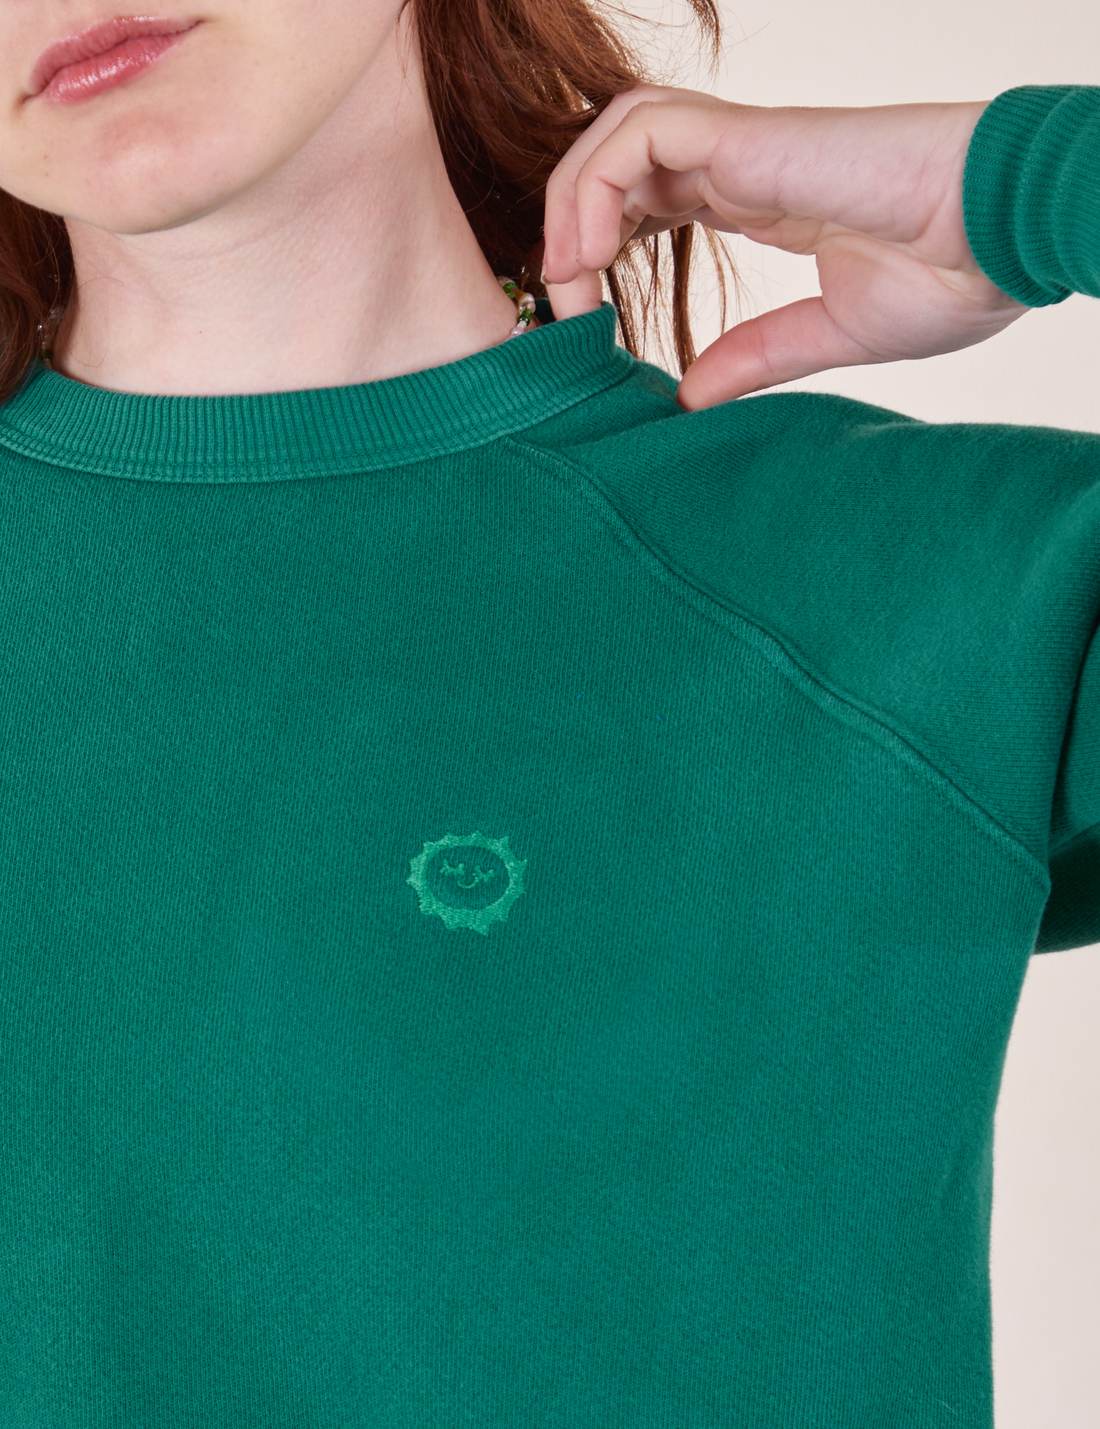 Heavyweight Crew in Hunter Green front close up on Alex. Embroidered sun baby logo in green